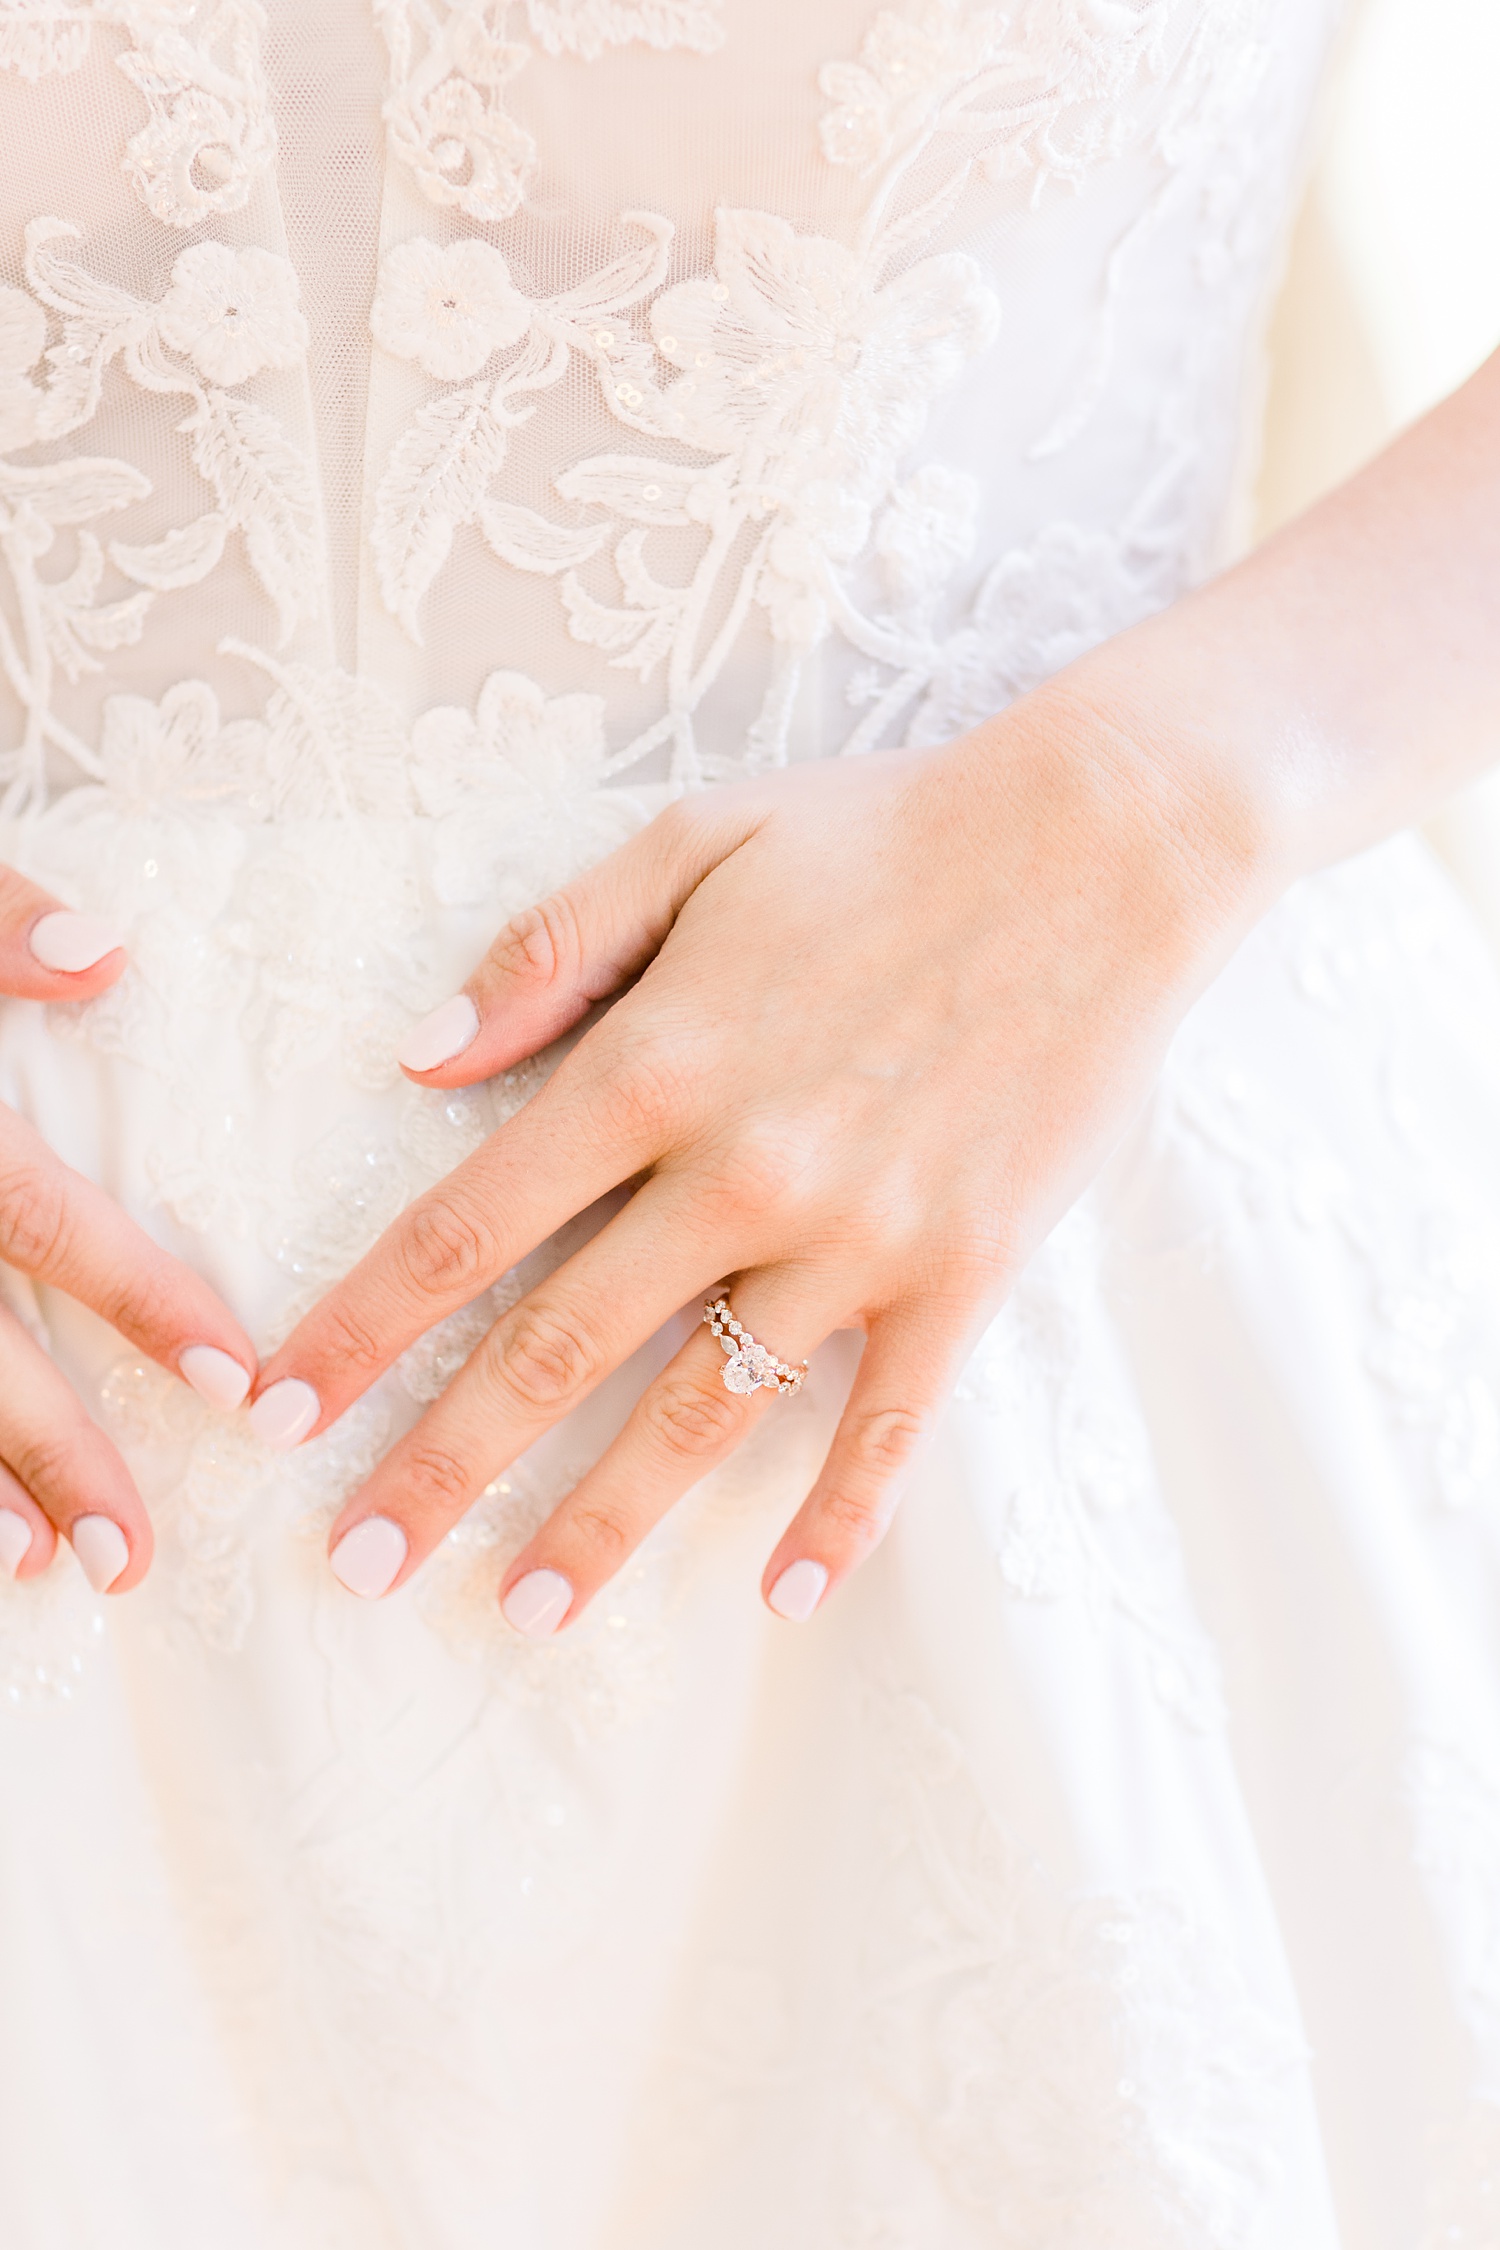 bride straightens dress out showing off engagement ring